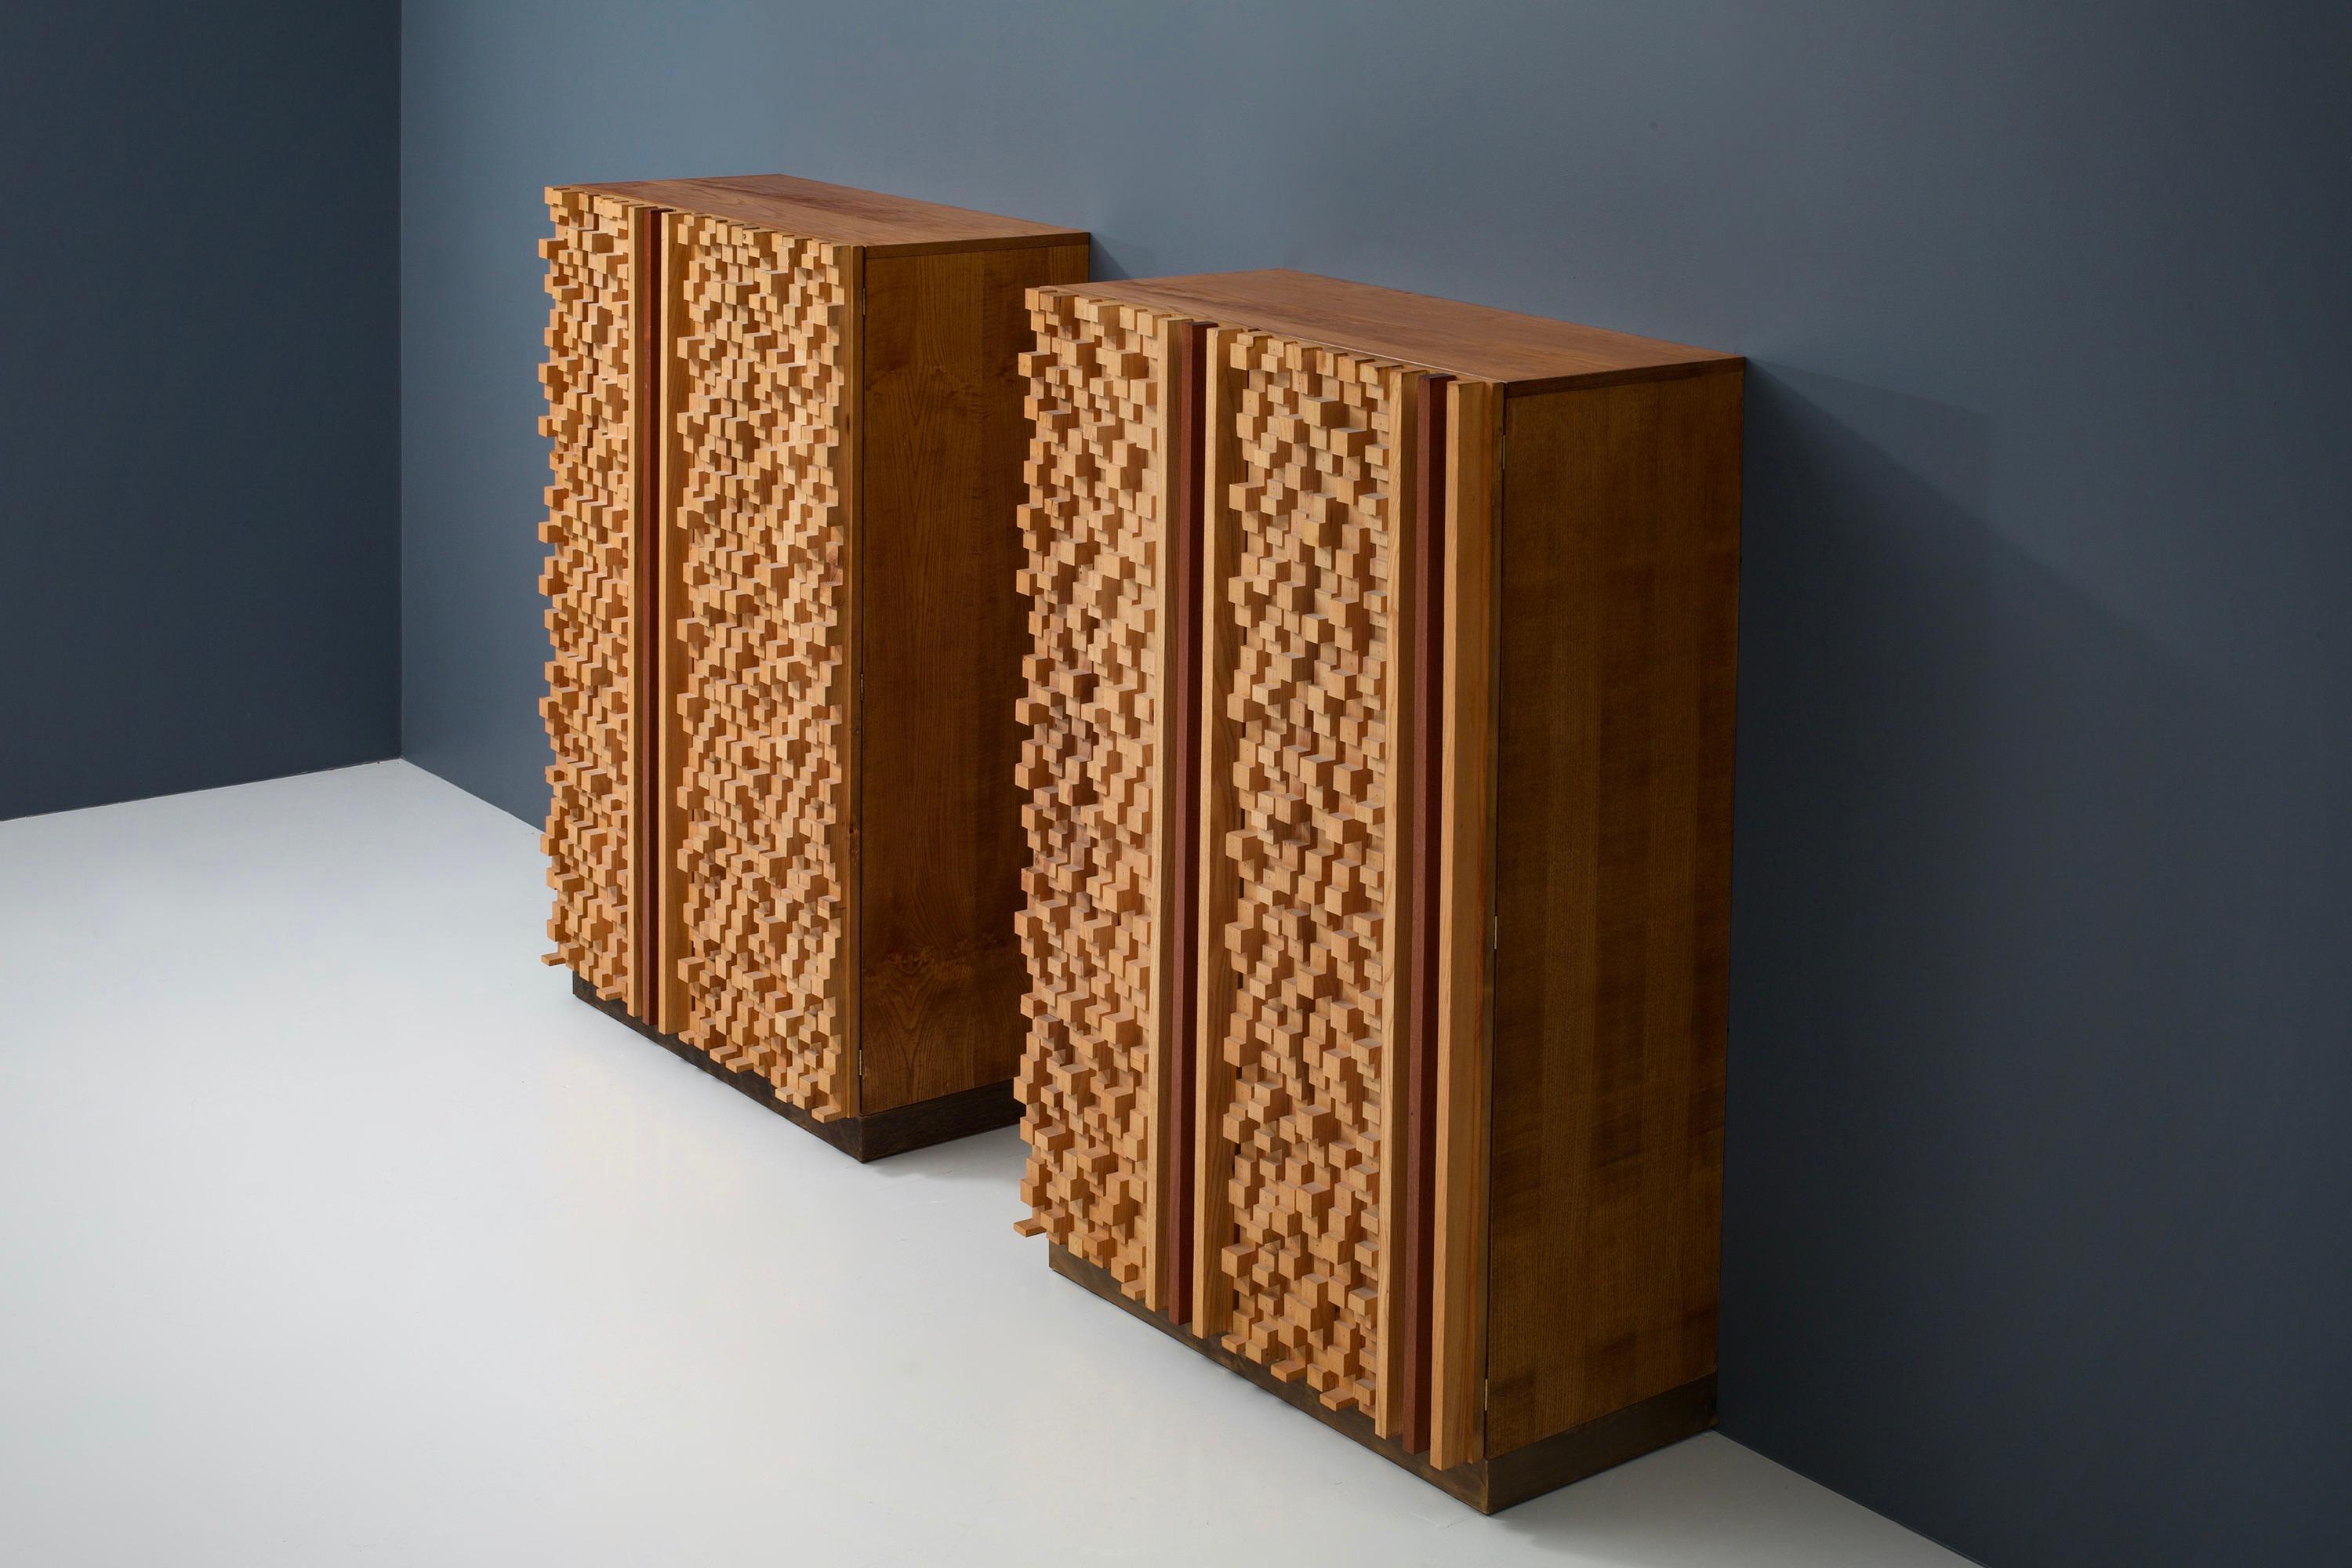 Set of 3 Wall Panels and 2 Cabinets by Stefano d'Amico, Italy, 1975 For Sale 1